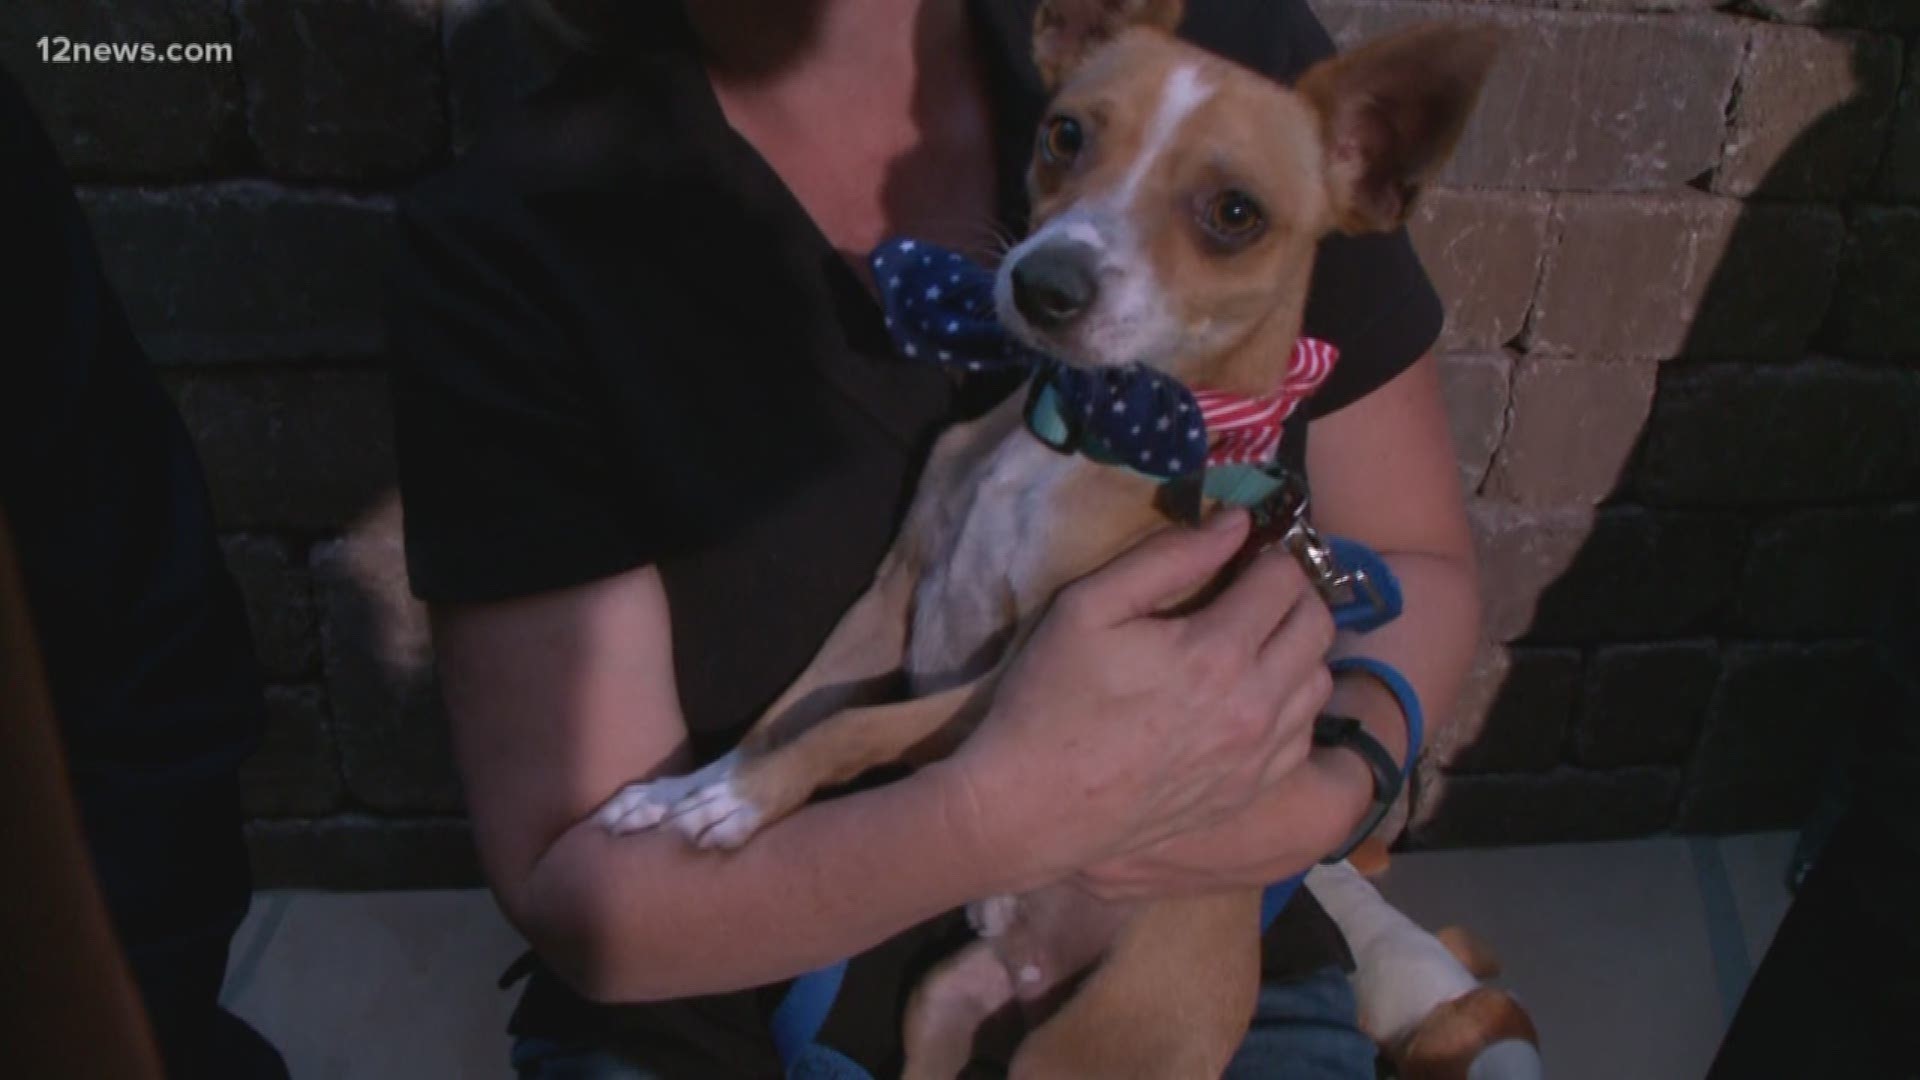 Fireworks are fun for us, but our furry friends aren't as thrilled by the loud noises. Melissa Gable from Foothills Animal Rescue gives us some advice on how to keep your pet safe over the holiday.